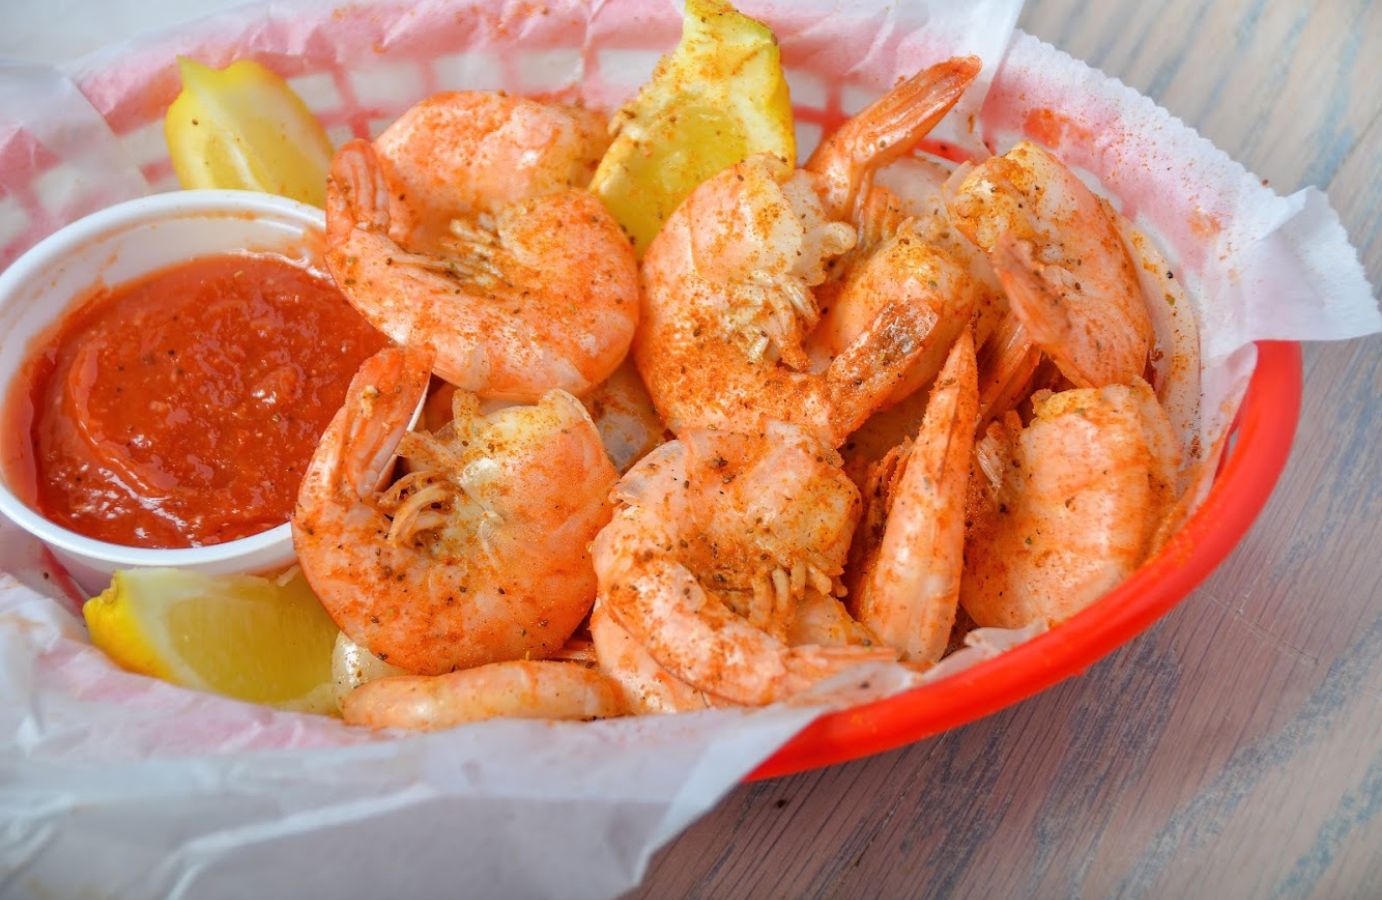 Closeup of a bowl of shrimp with lemons and dipping sauce on the side